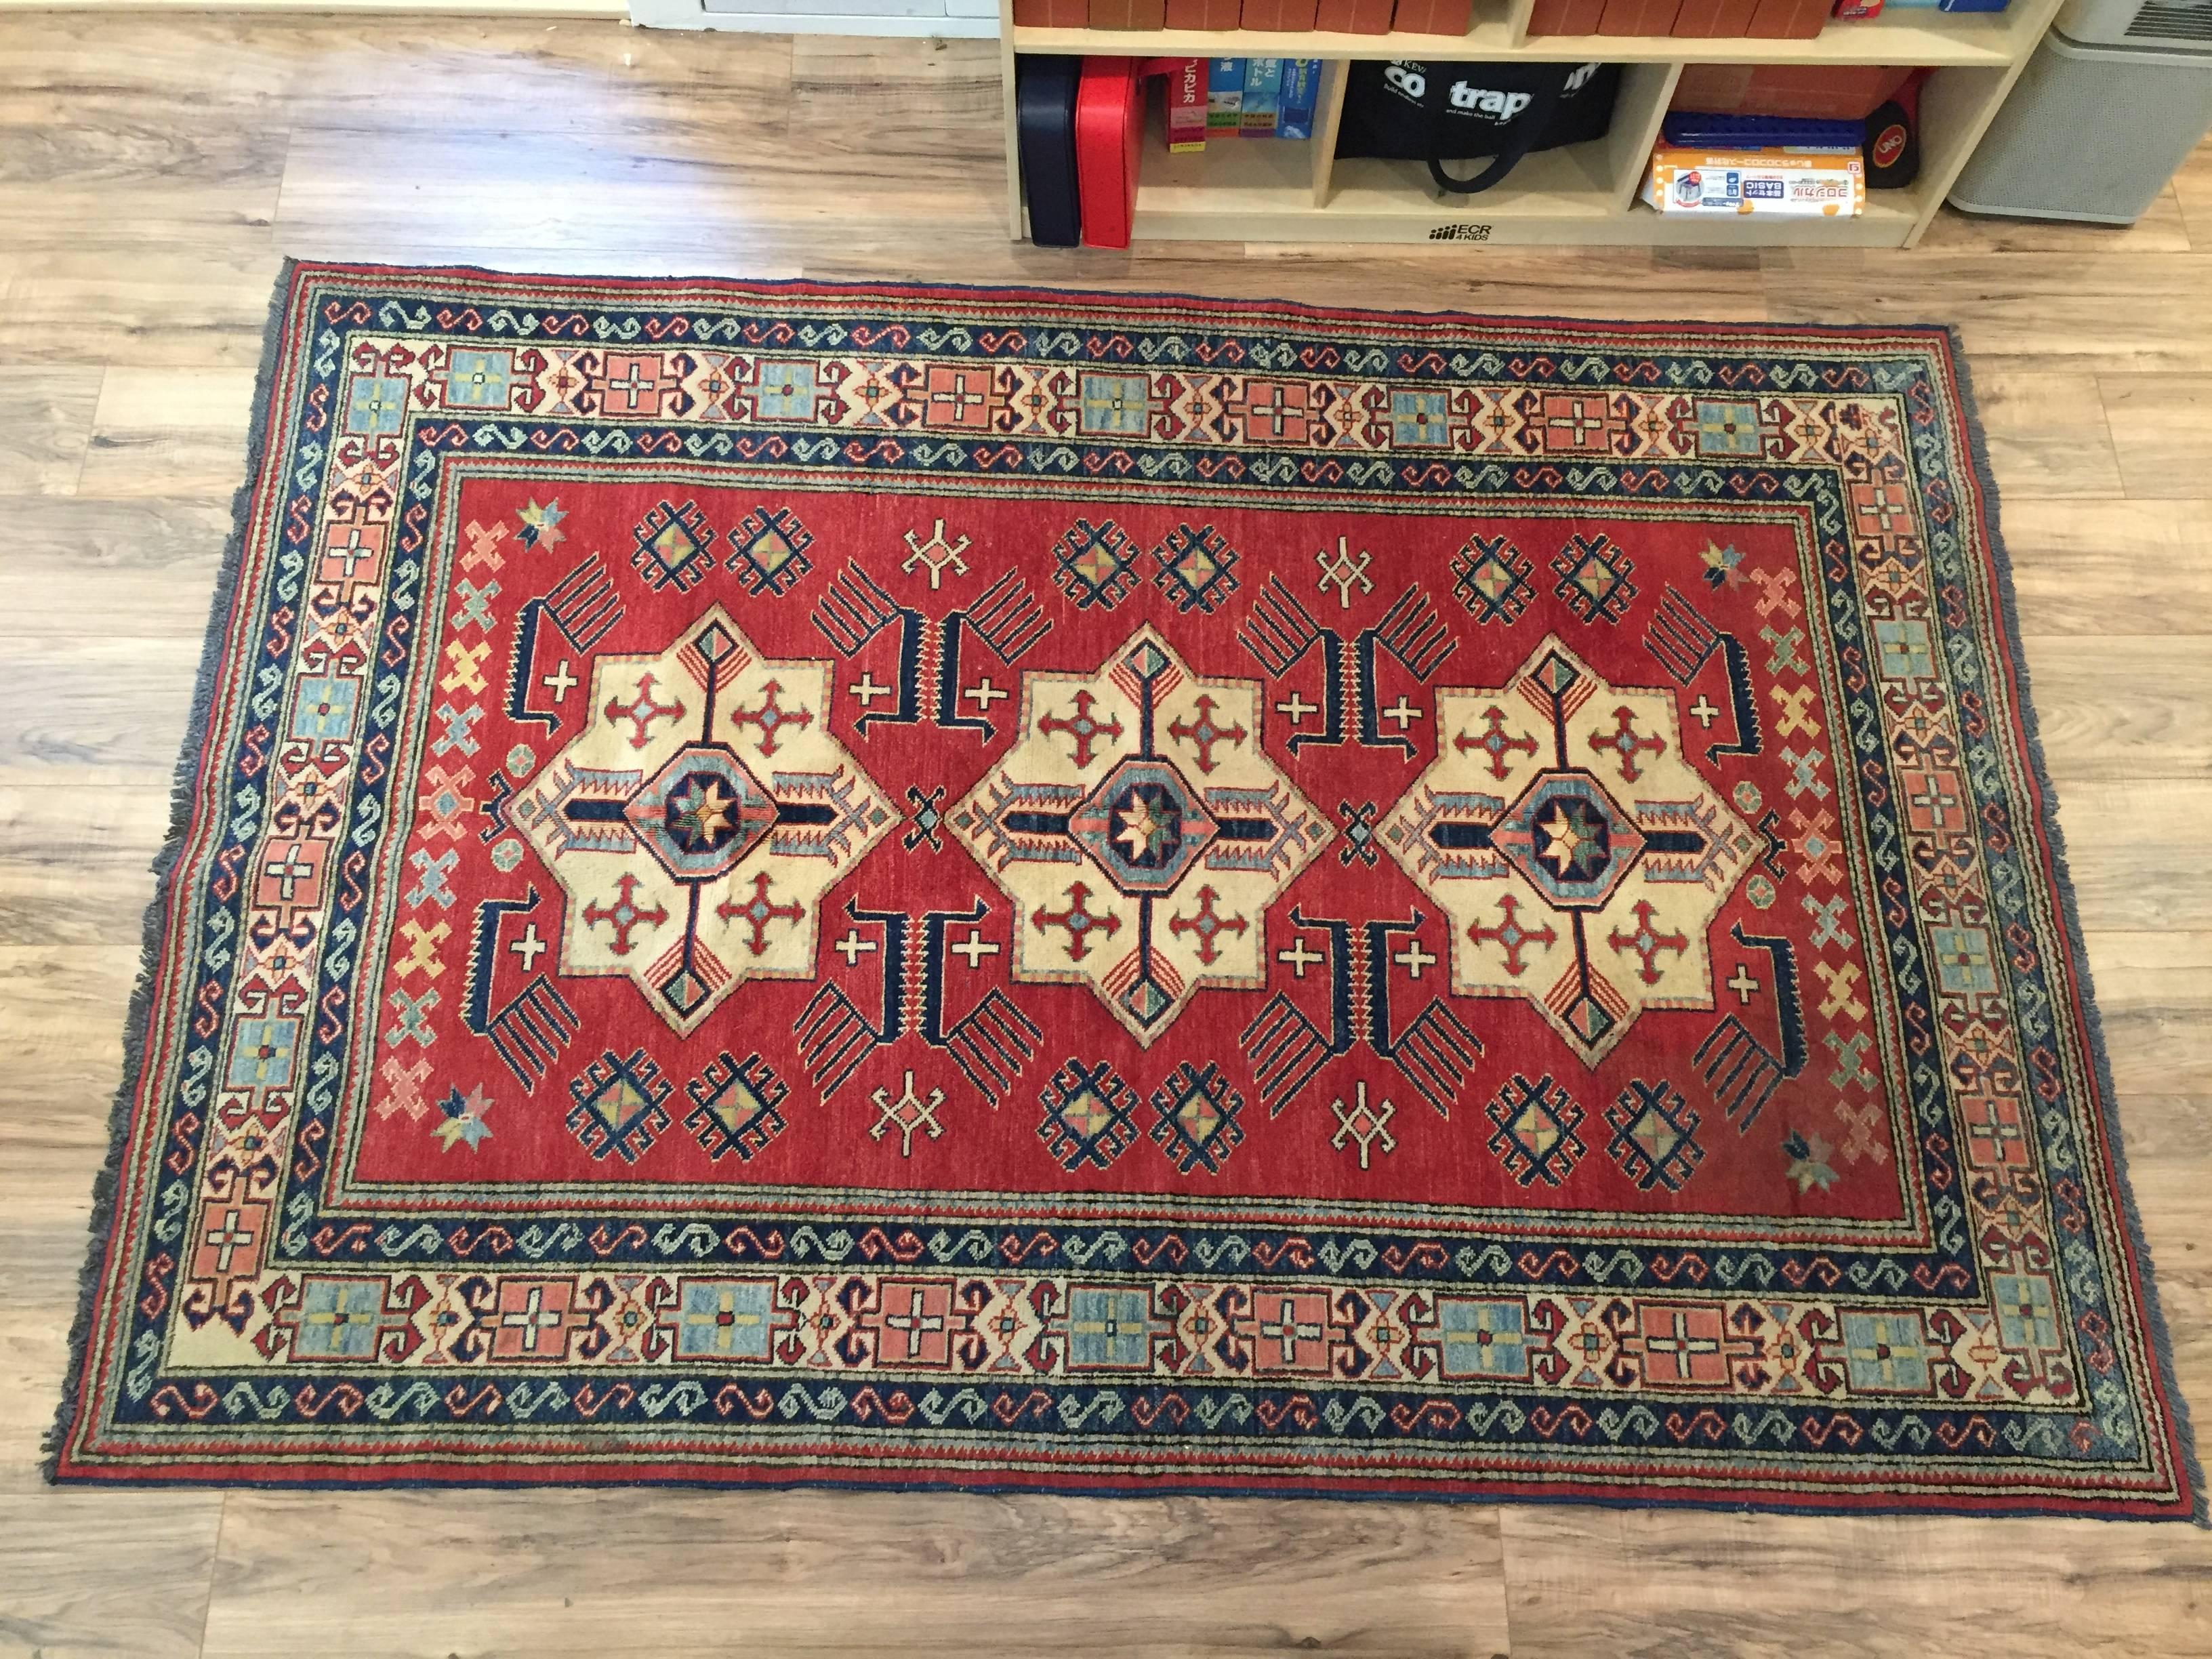 Triple medalion handwoven Persian rug style carpet, possibly caucasion.